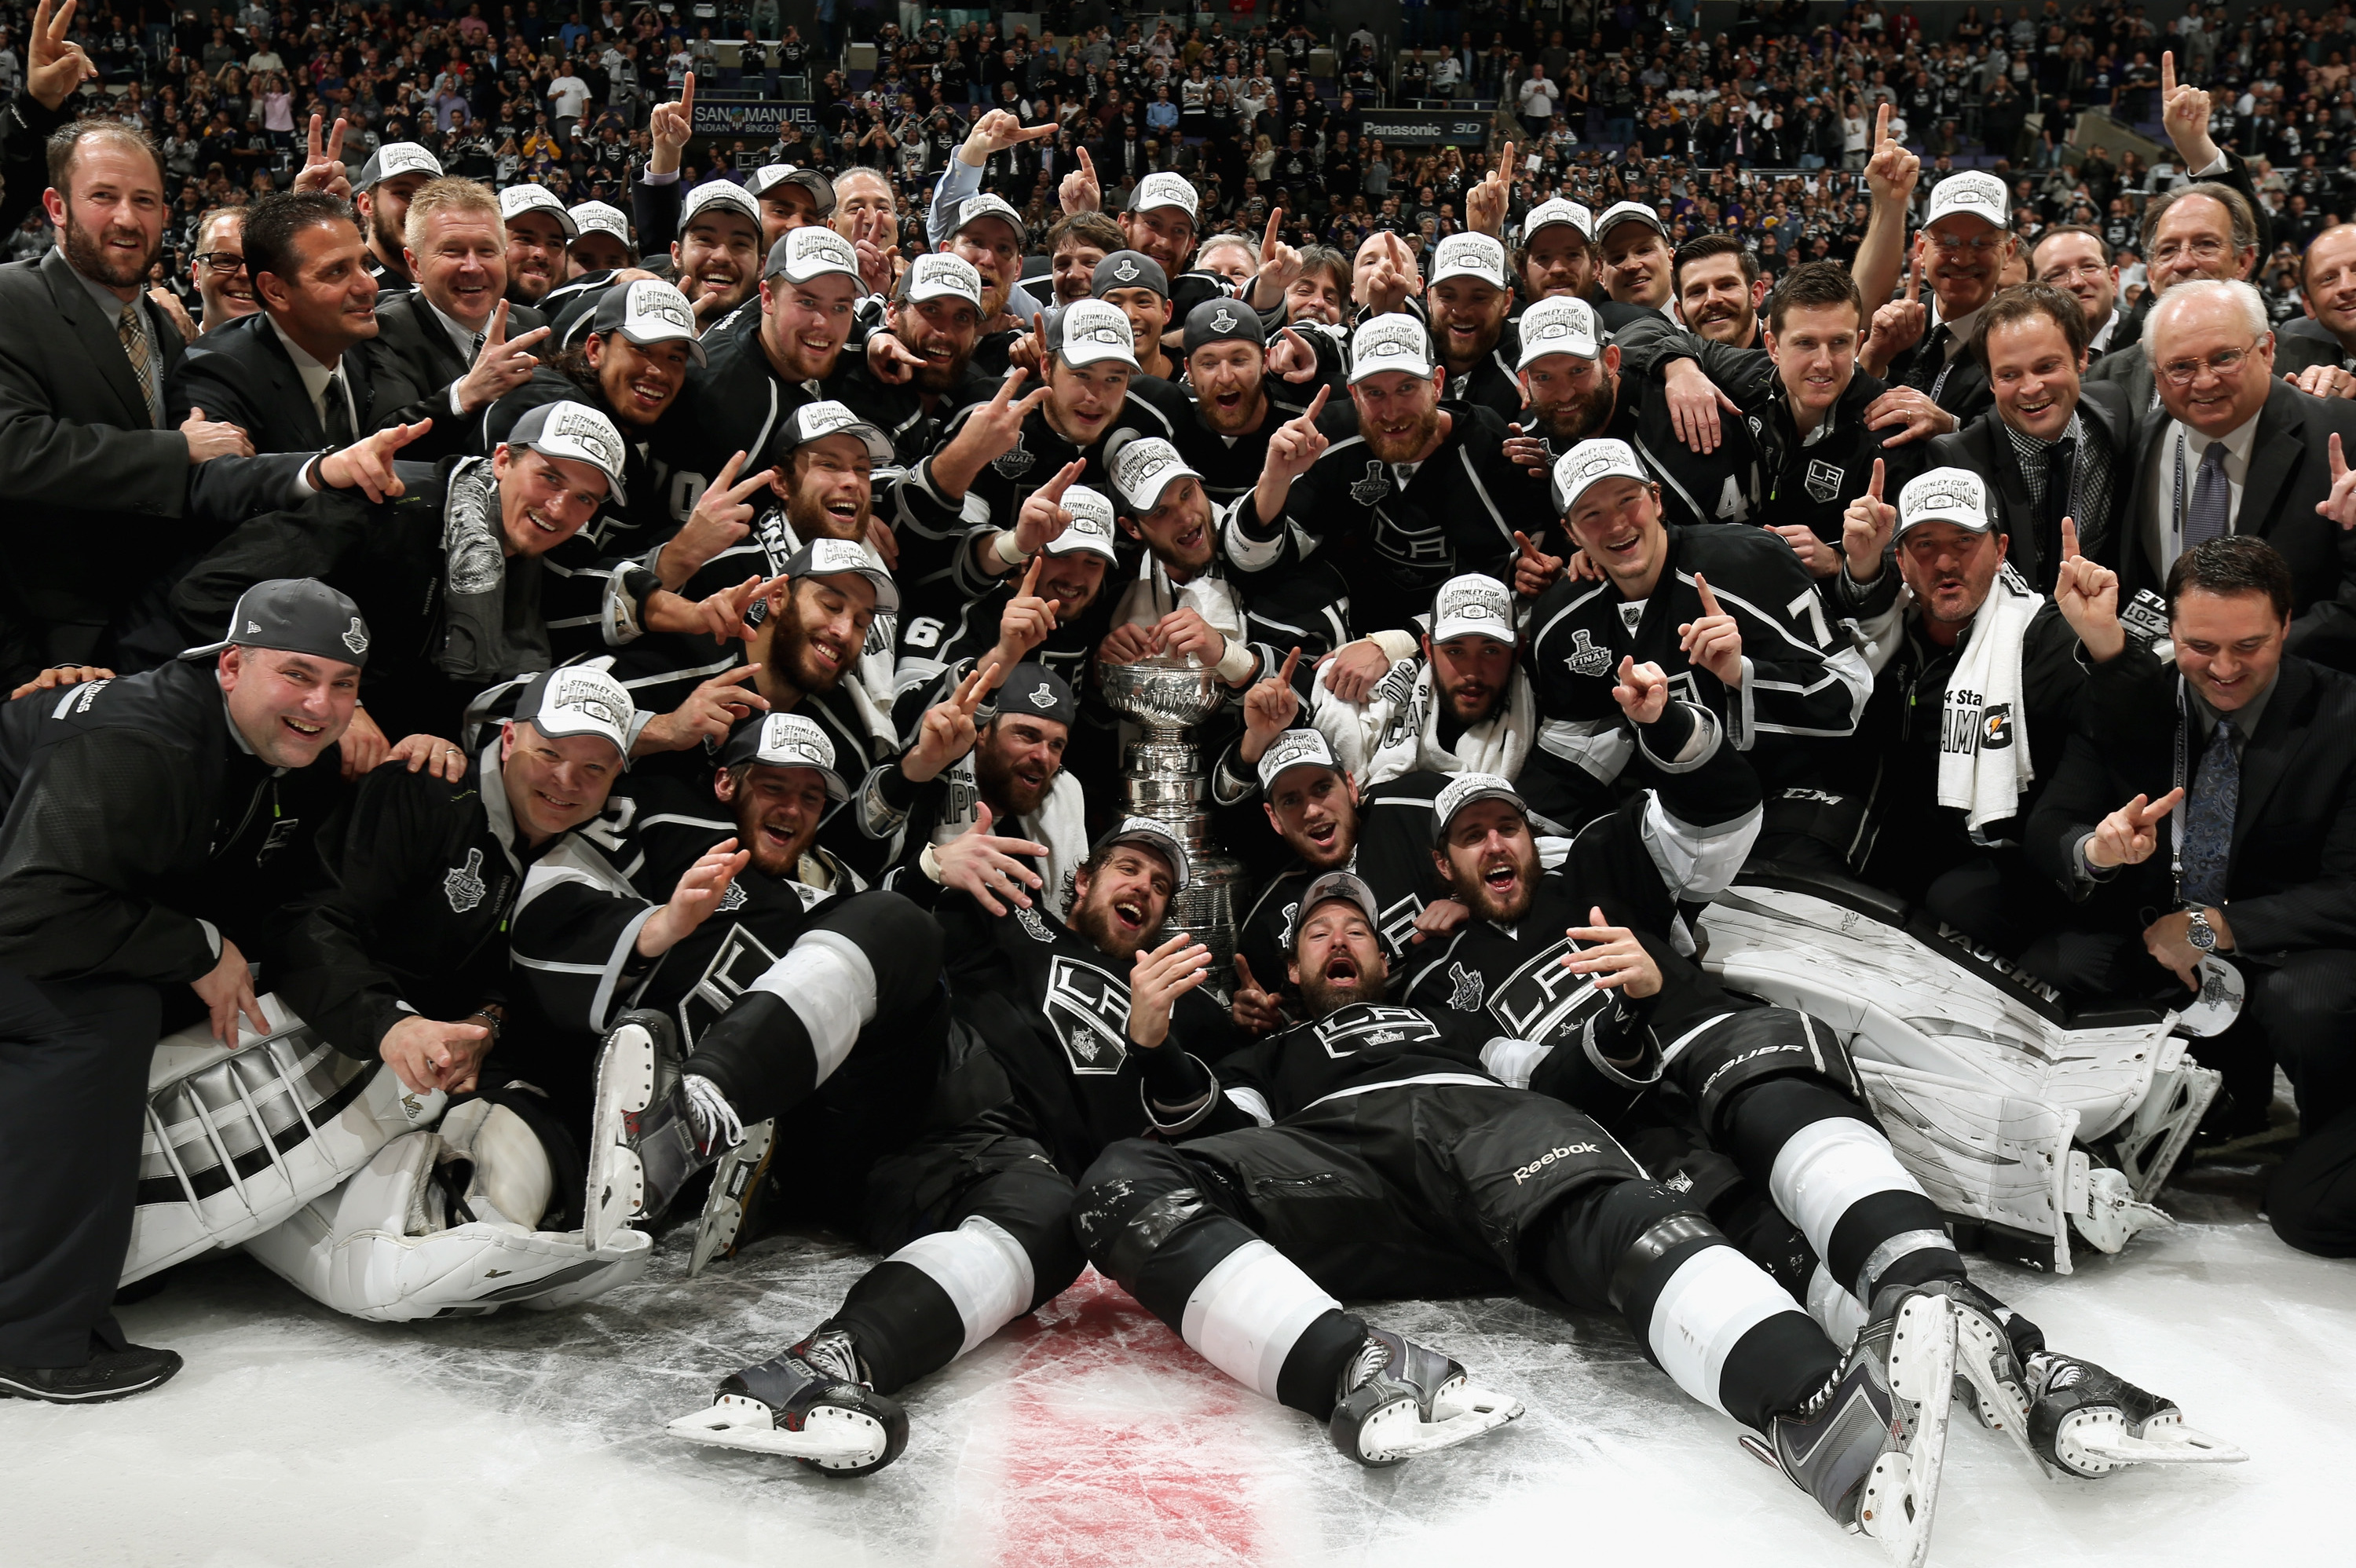 L.A. Kings Fans Celebrate The Team's Stanley Cup Victory - LA Kings Insider